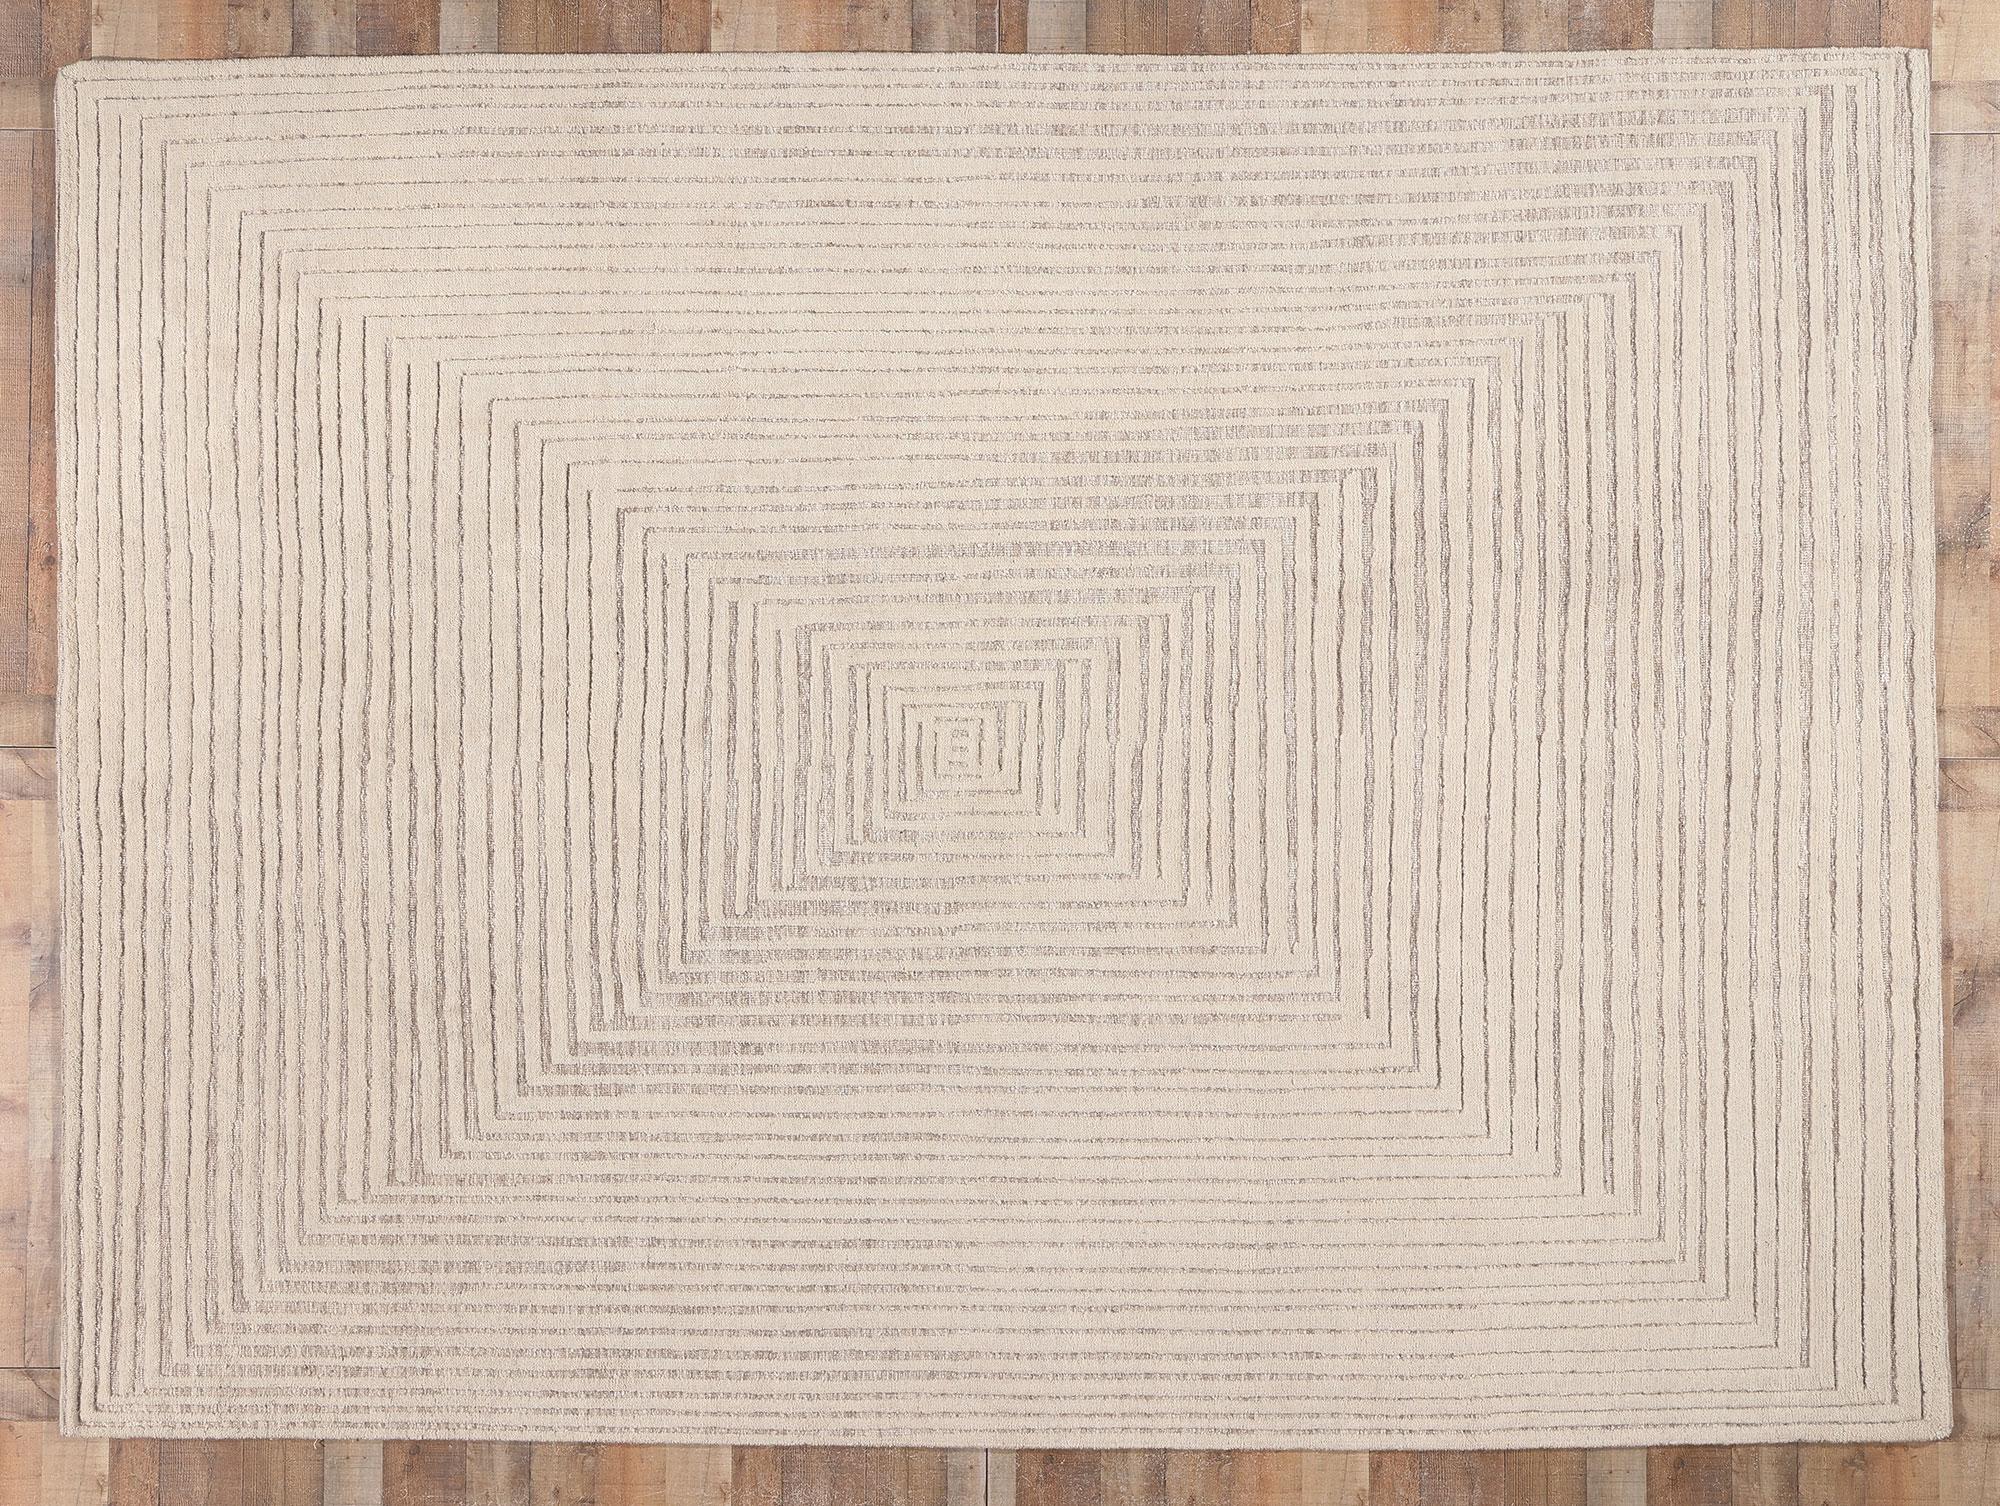 Modern Textured High-Low Rug, Sublime Simplicity Meets Tantalizing Texture 1